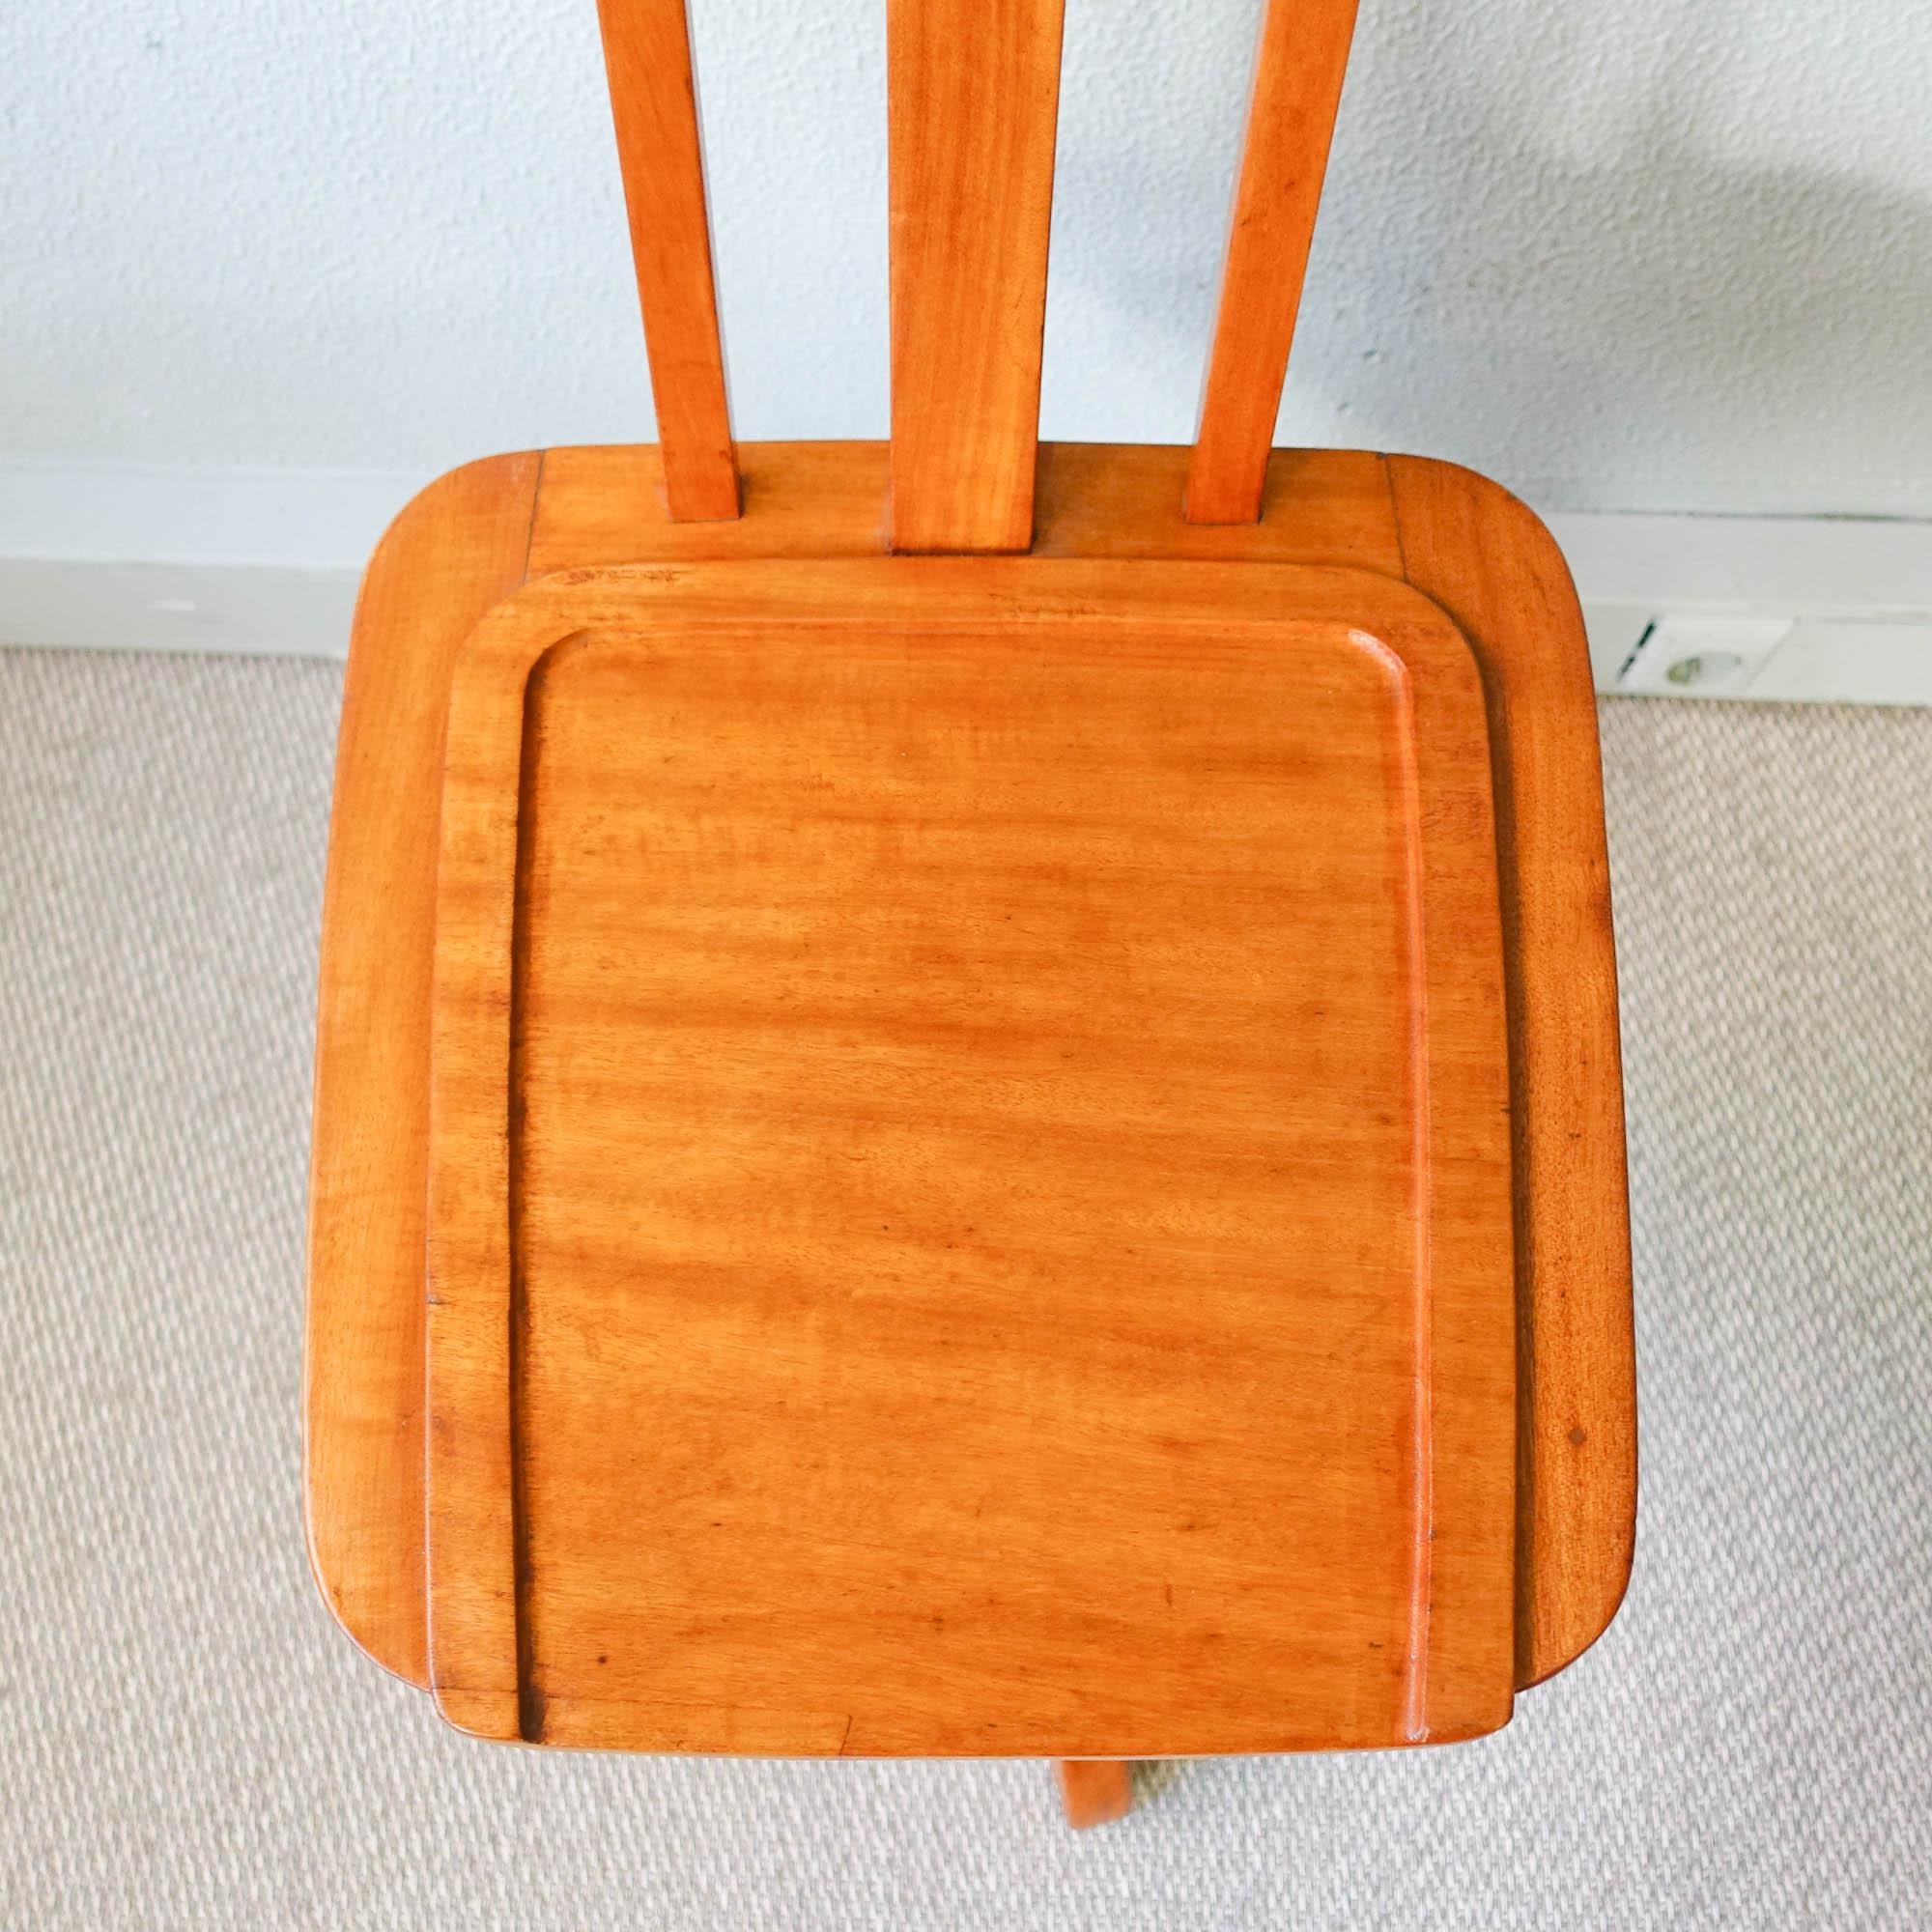 Typist Chair, Model Simples, by Móveis Olaio, 1940's For Sale 2